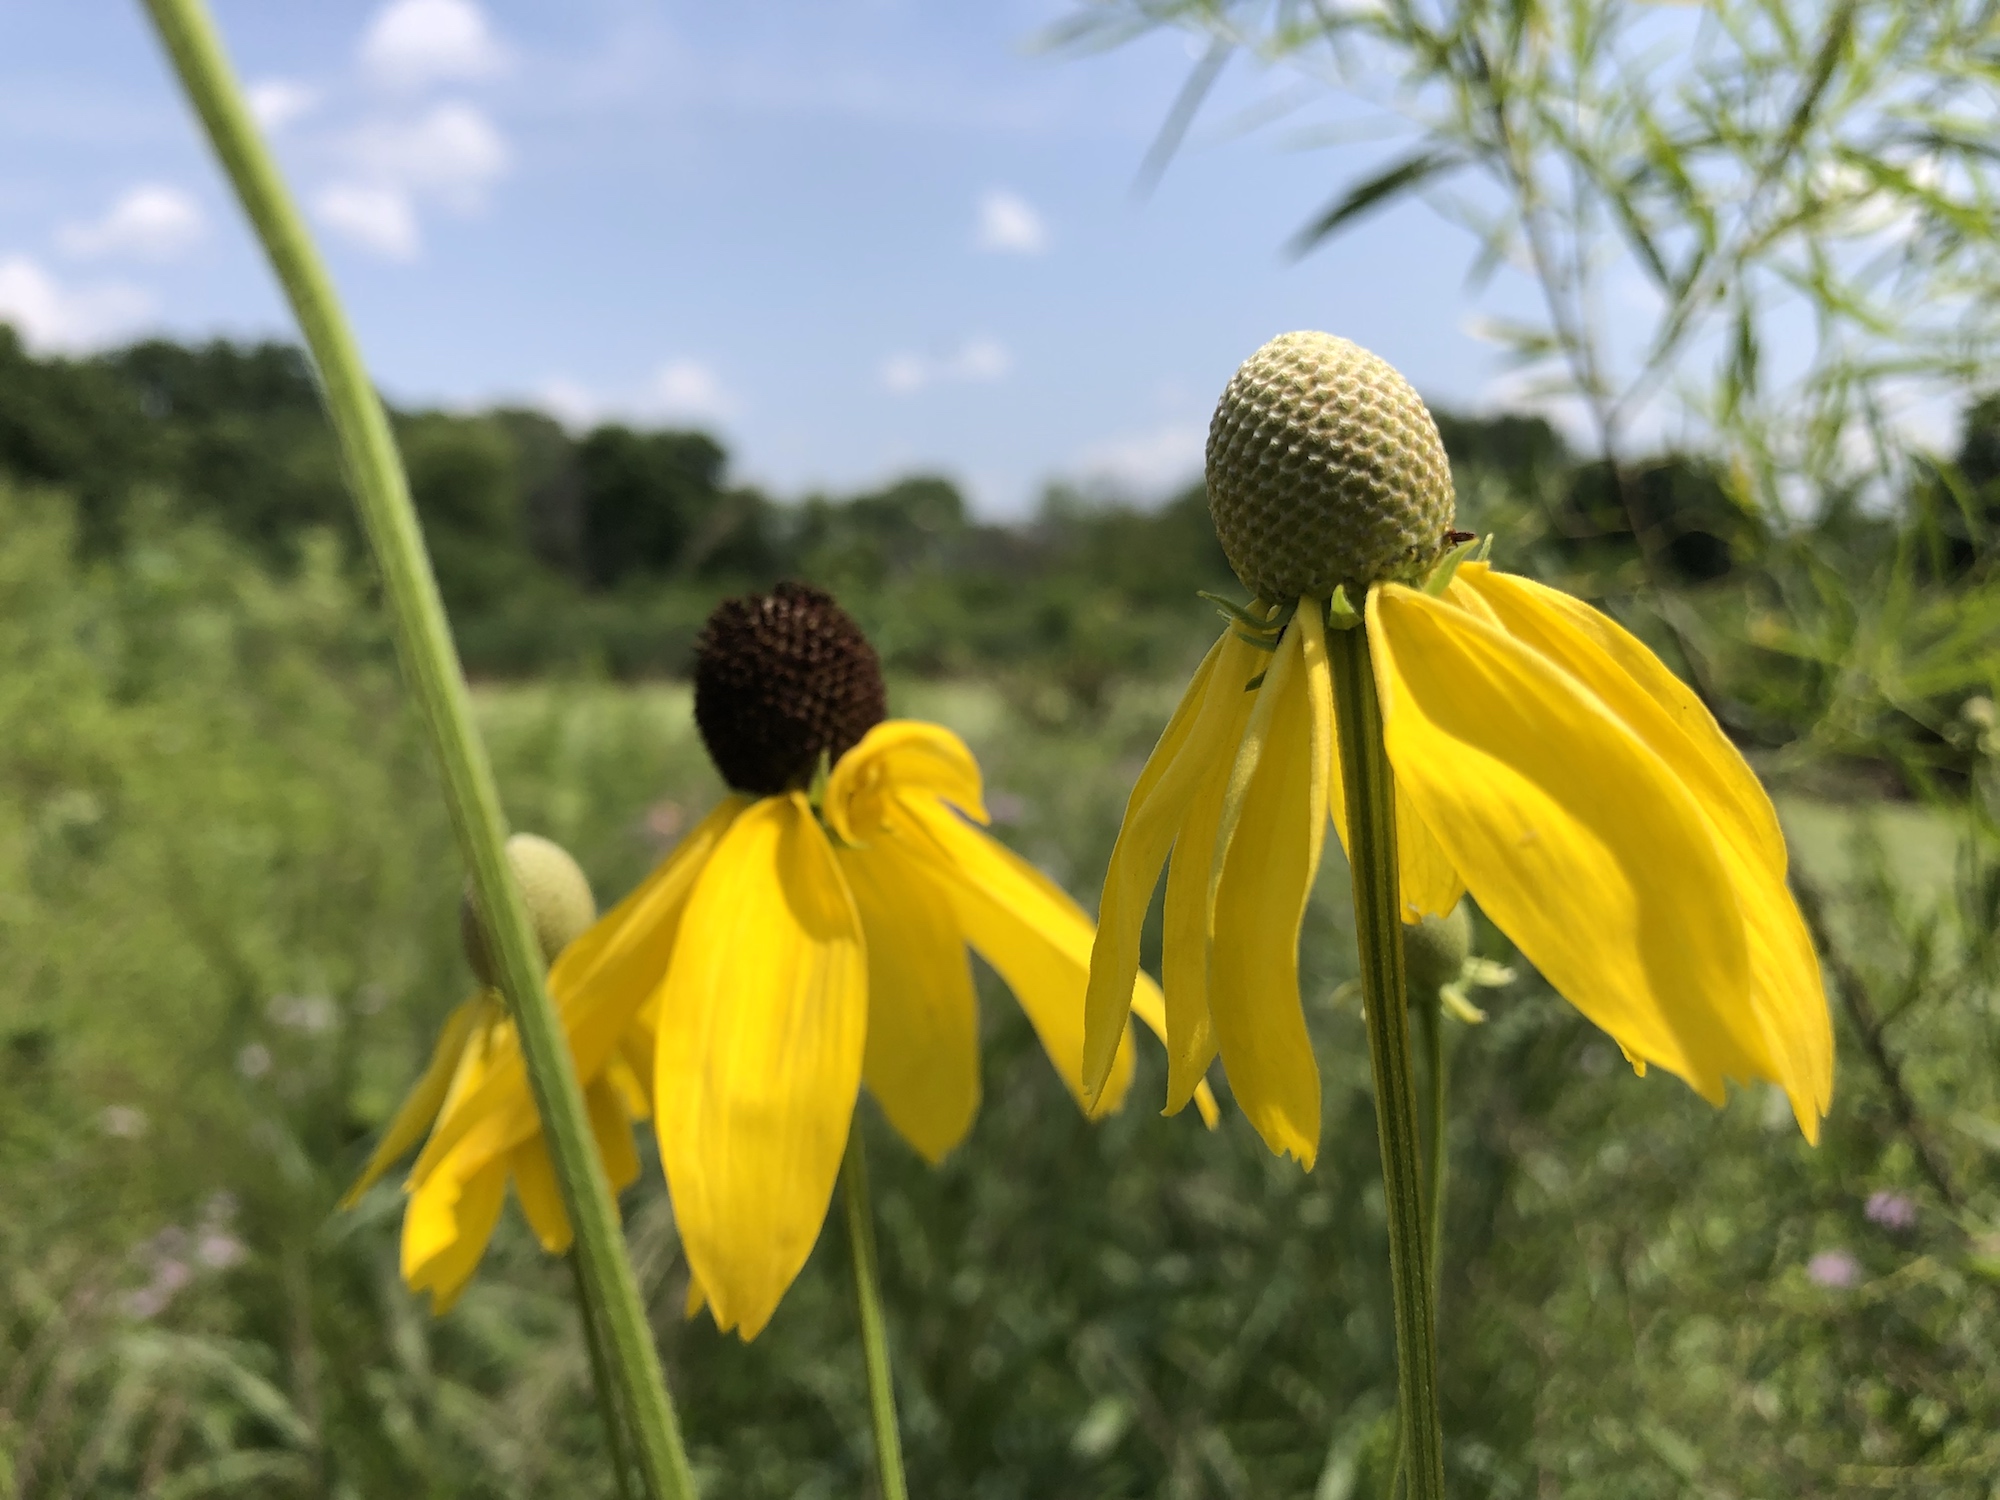 Gray-headed coneflower on shore of Marion Dunn Pond in Madison, Wisconsin on July 25, 2019.